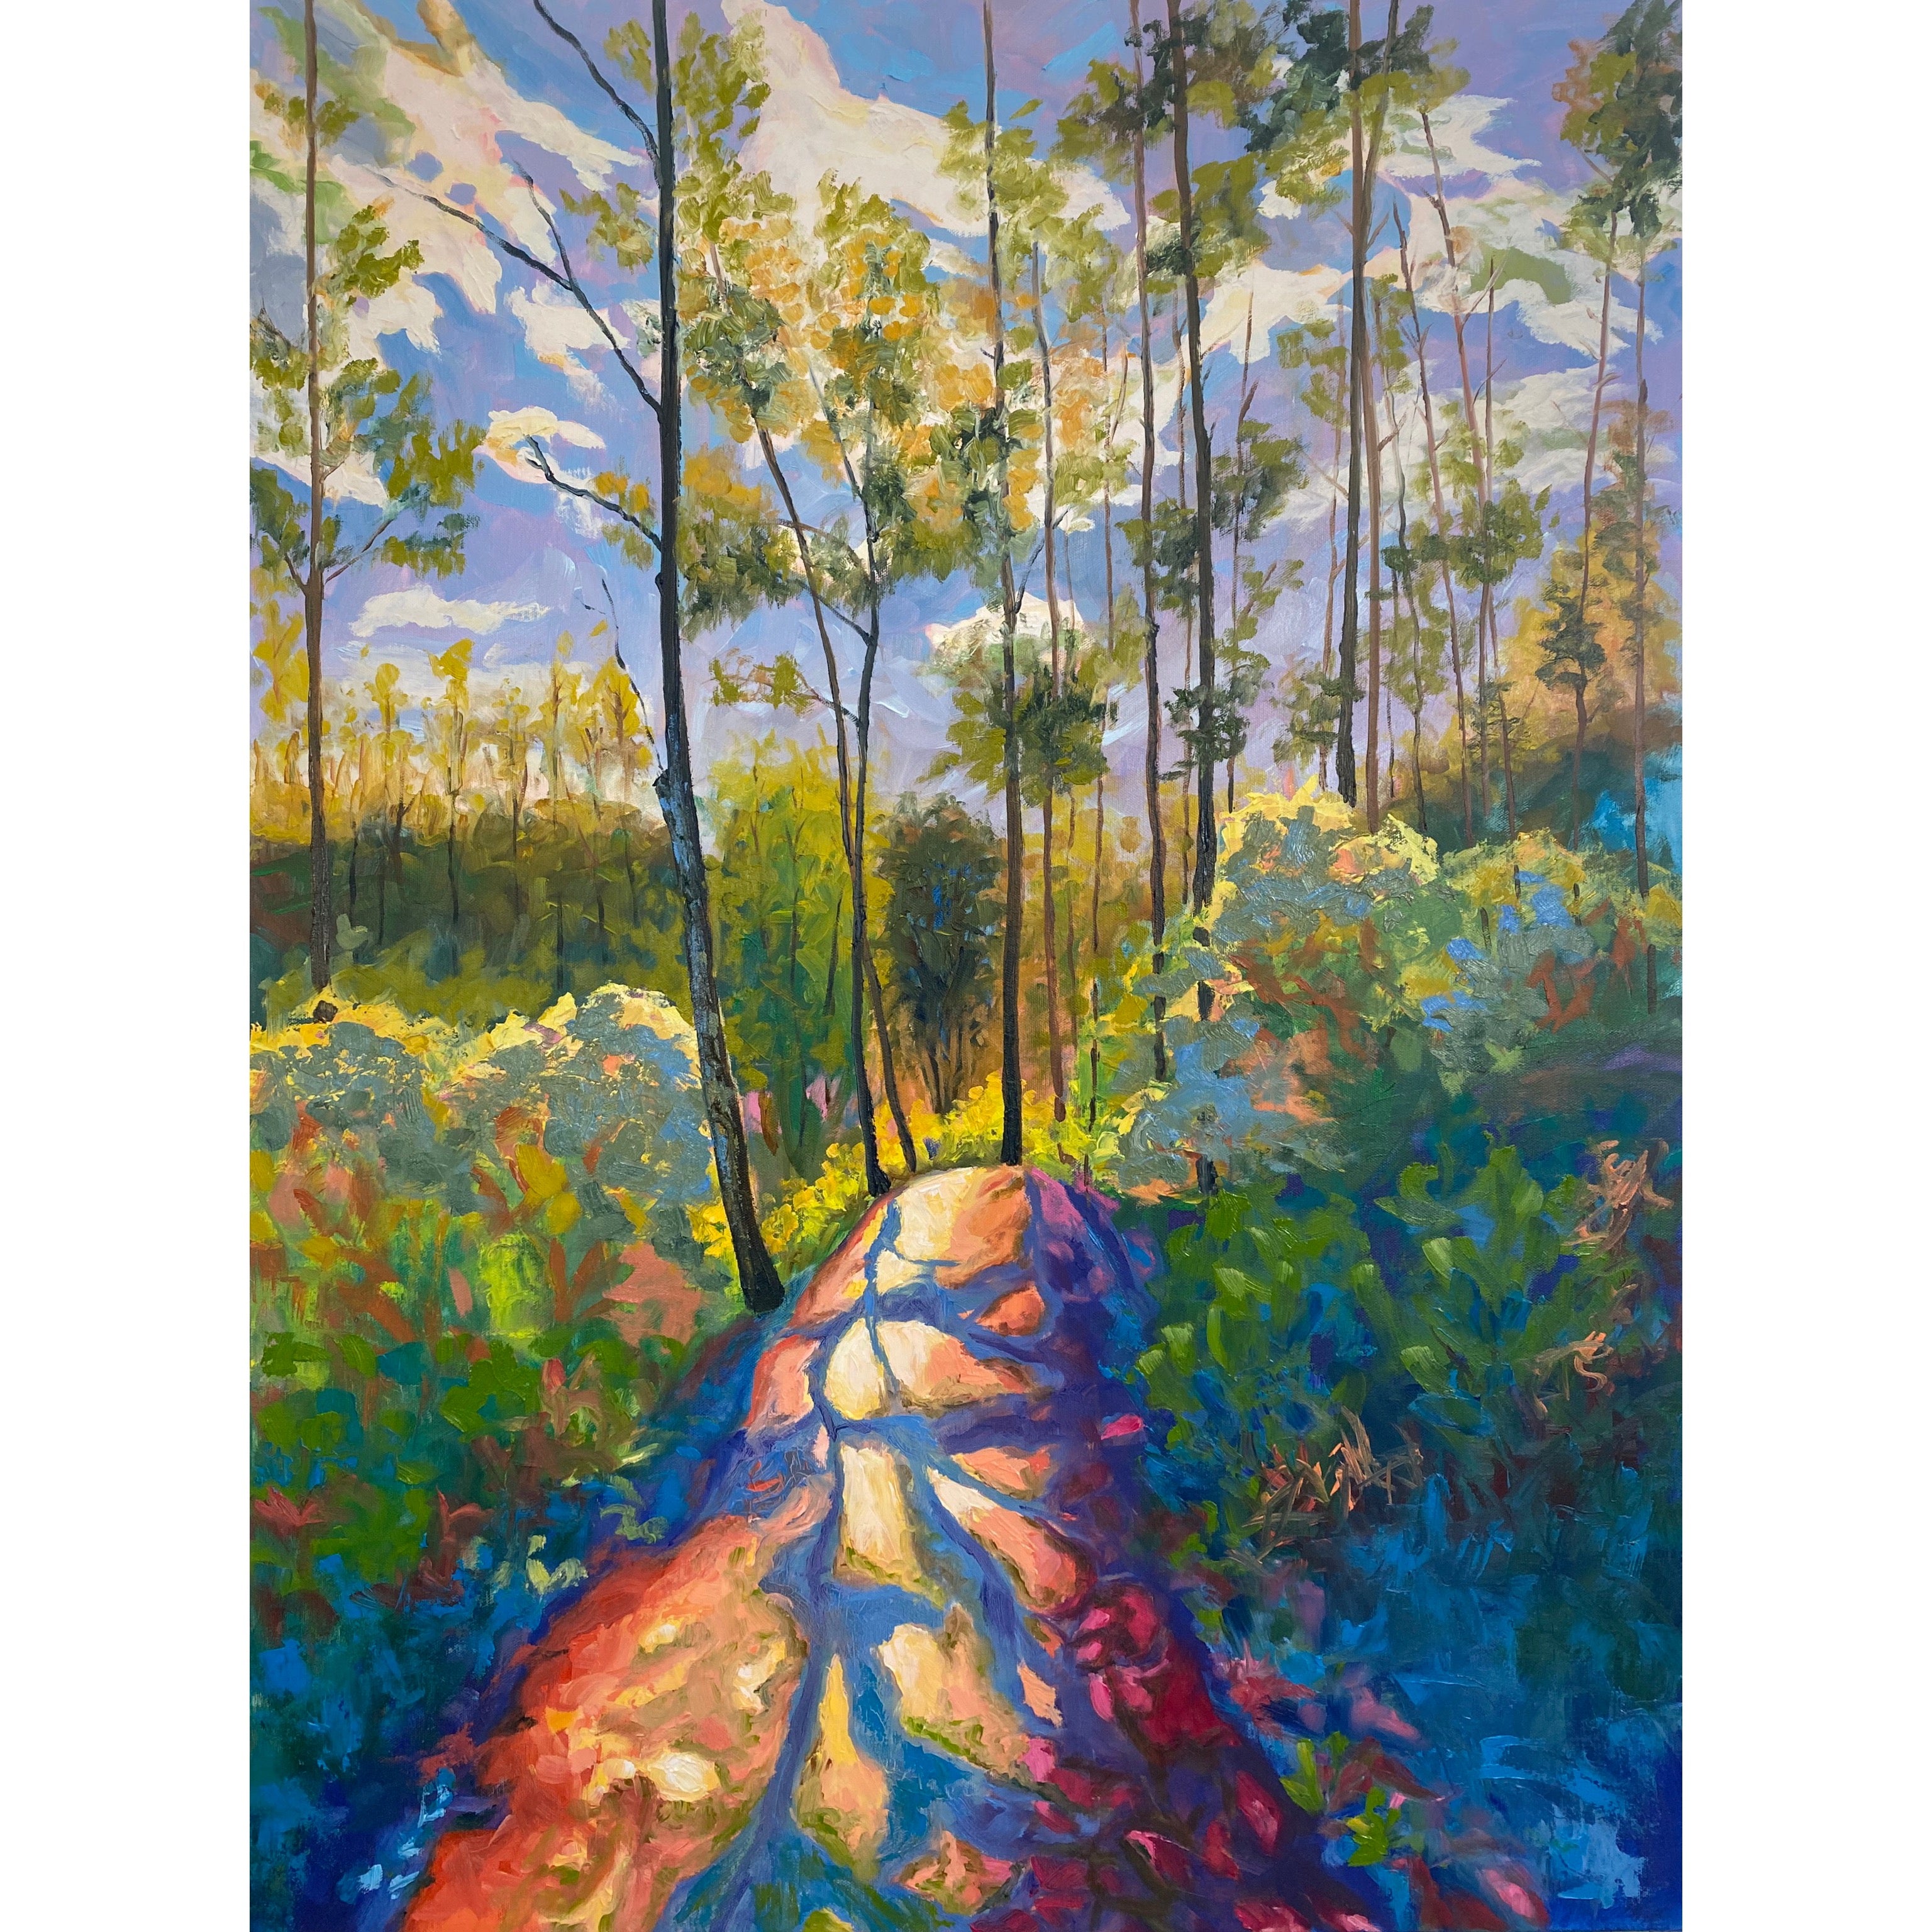 Trees Paint The Ground | Oil on Canvas | 30”x40"